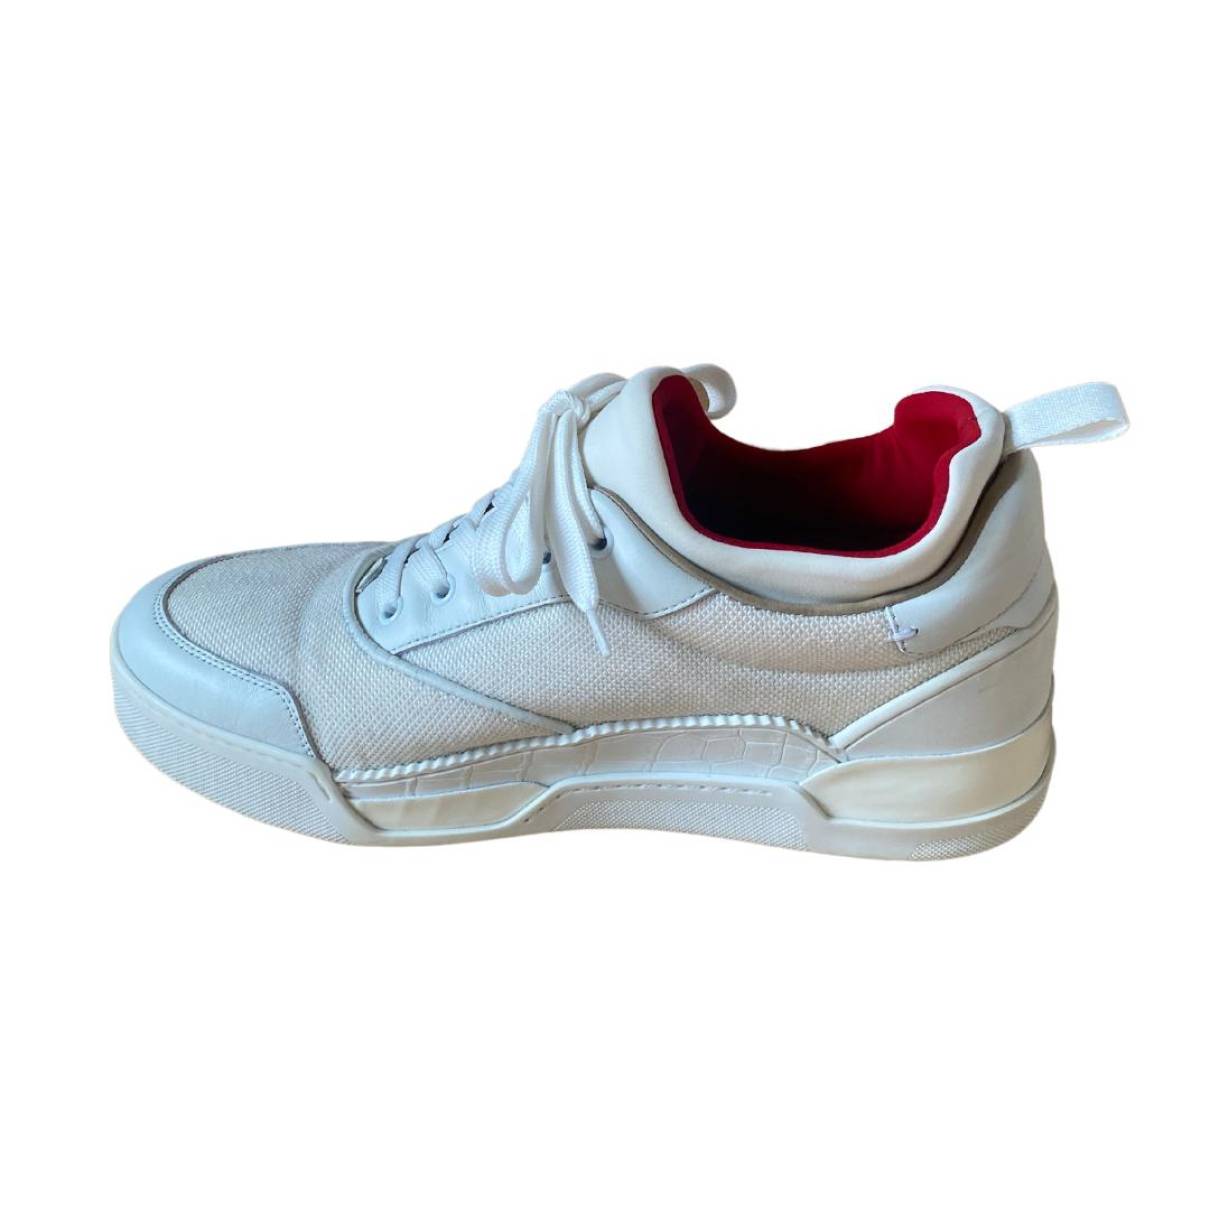 Christian Louboutin - Authenticated Aurelien Trainer - Cloth White Plain for Men, Never Worn, with Tag